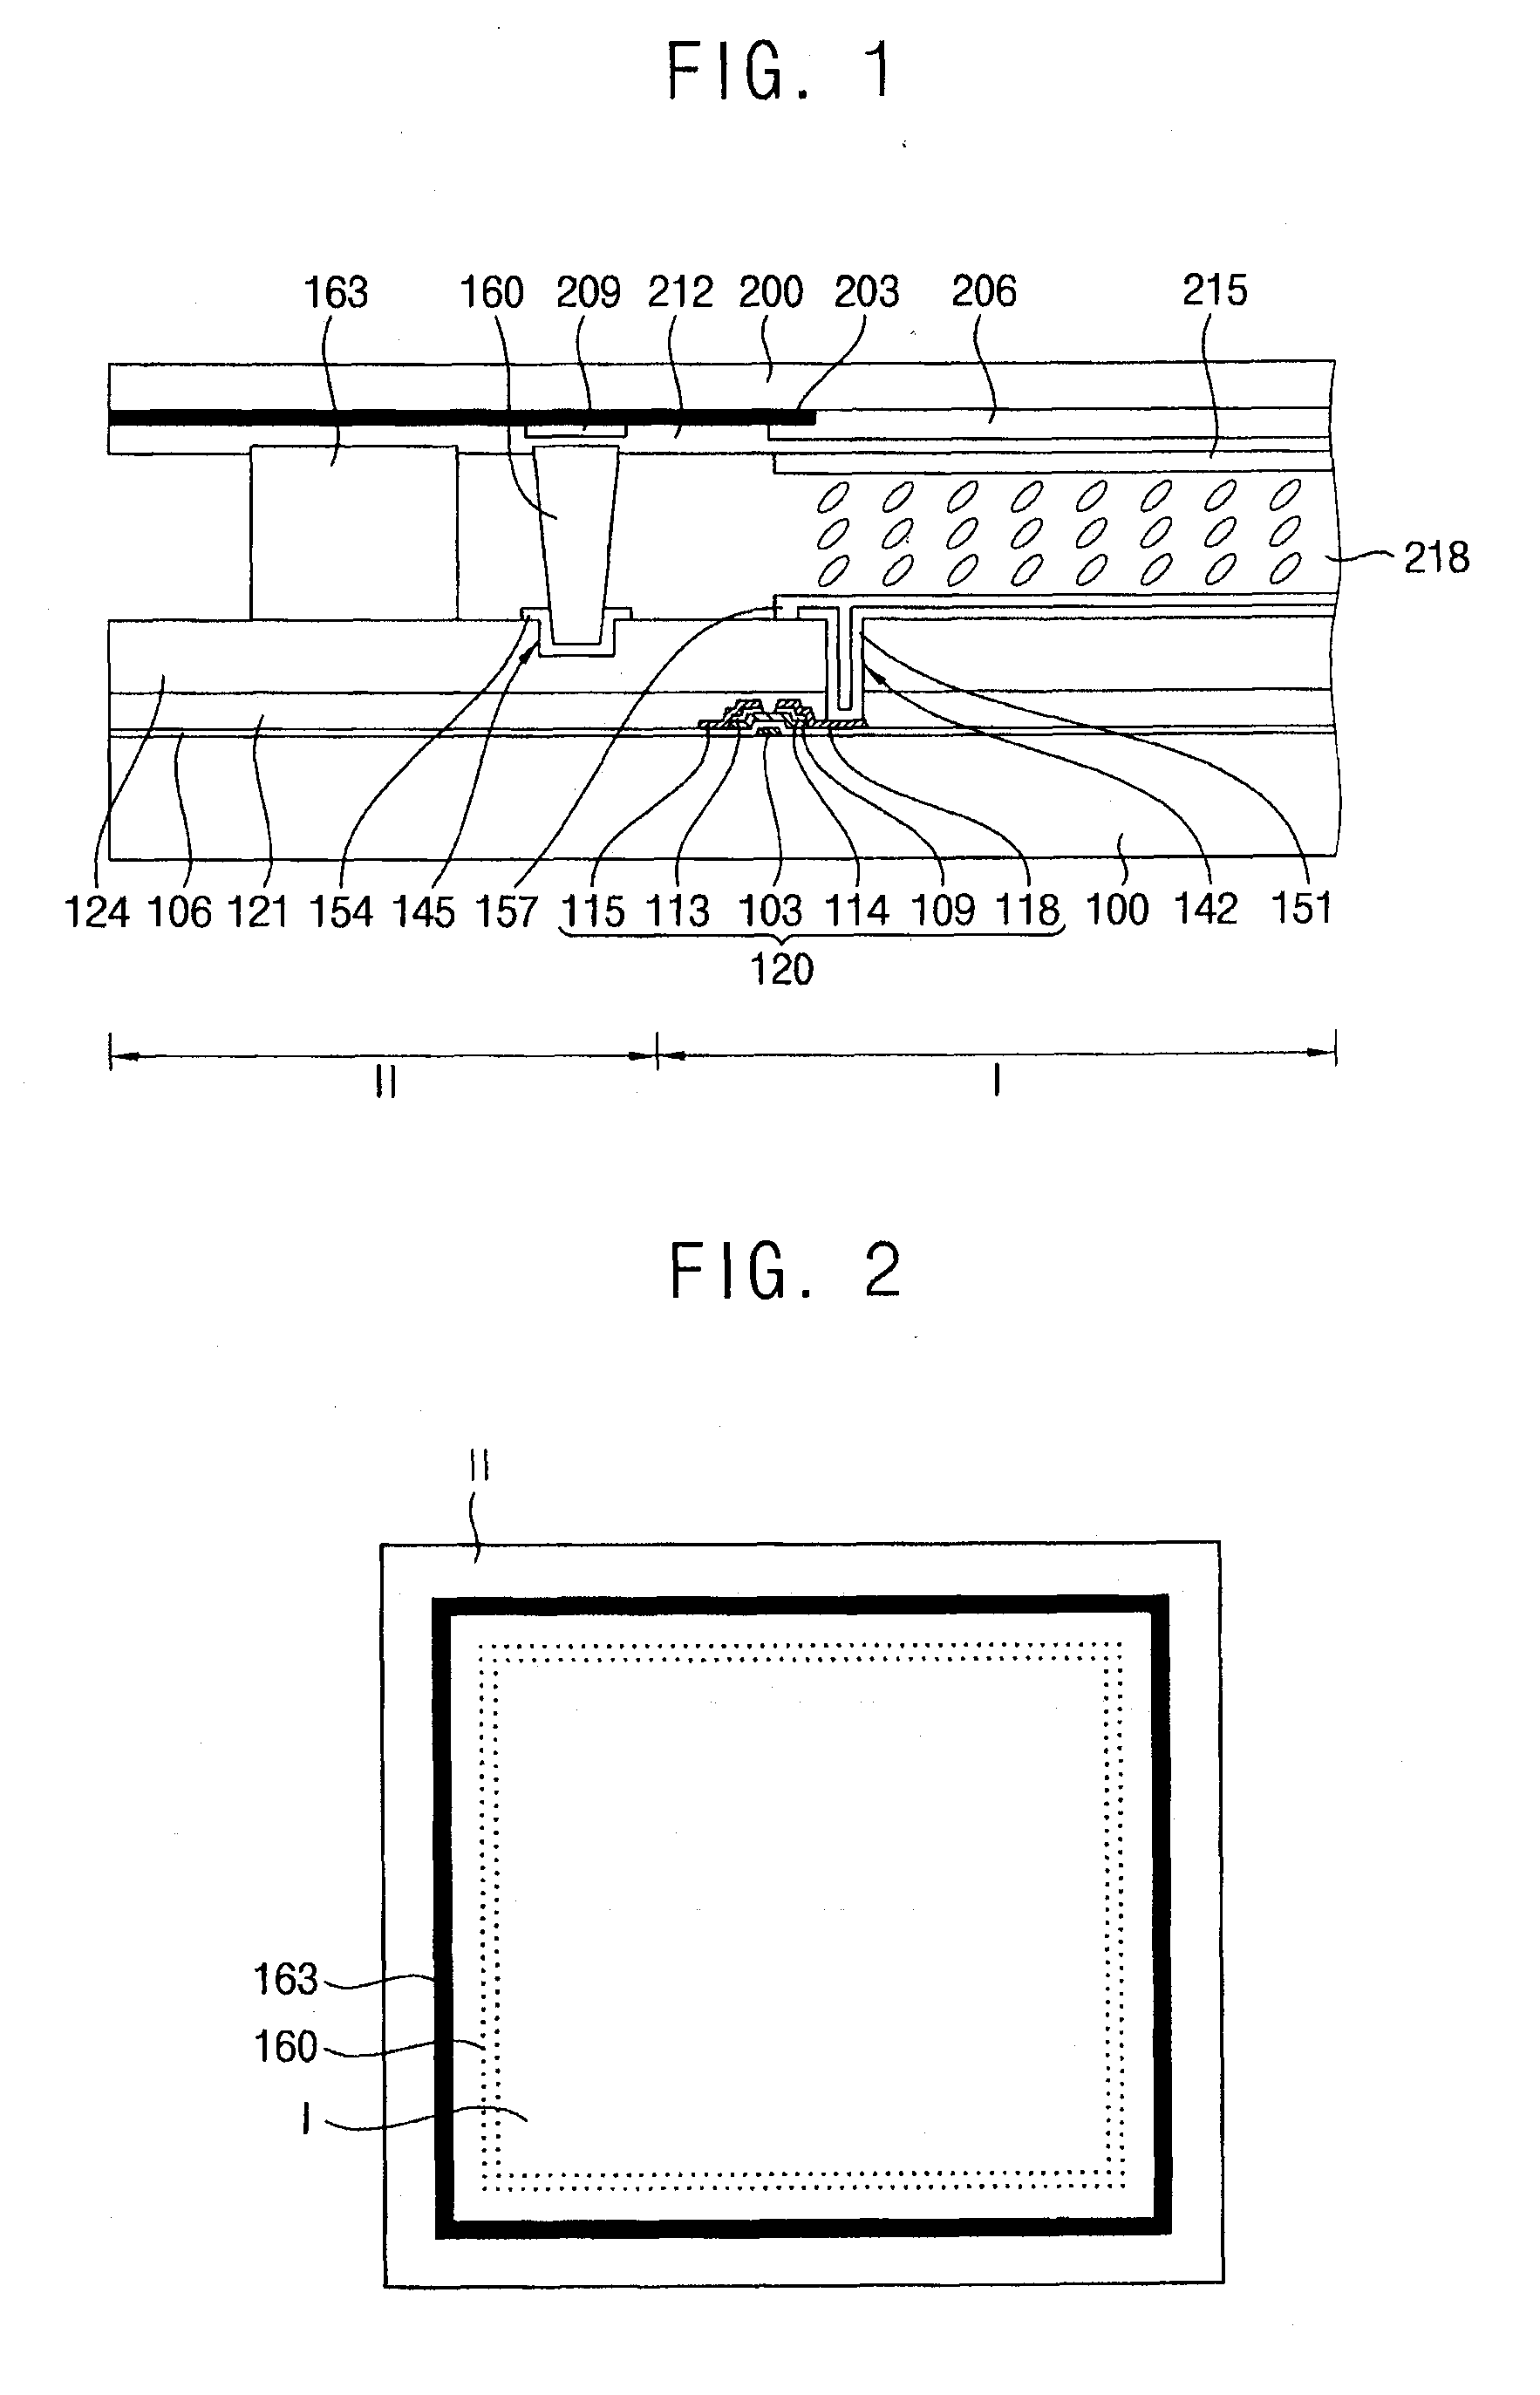 Liquid crystal display devices and methods of manufacturing liquid crystal display devices